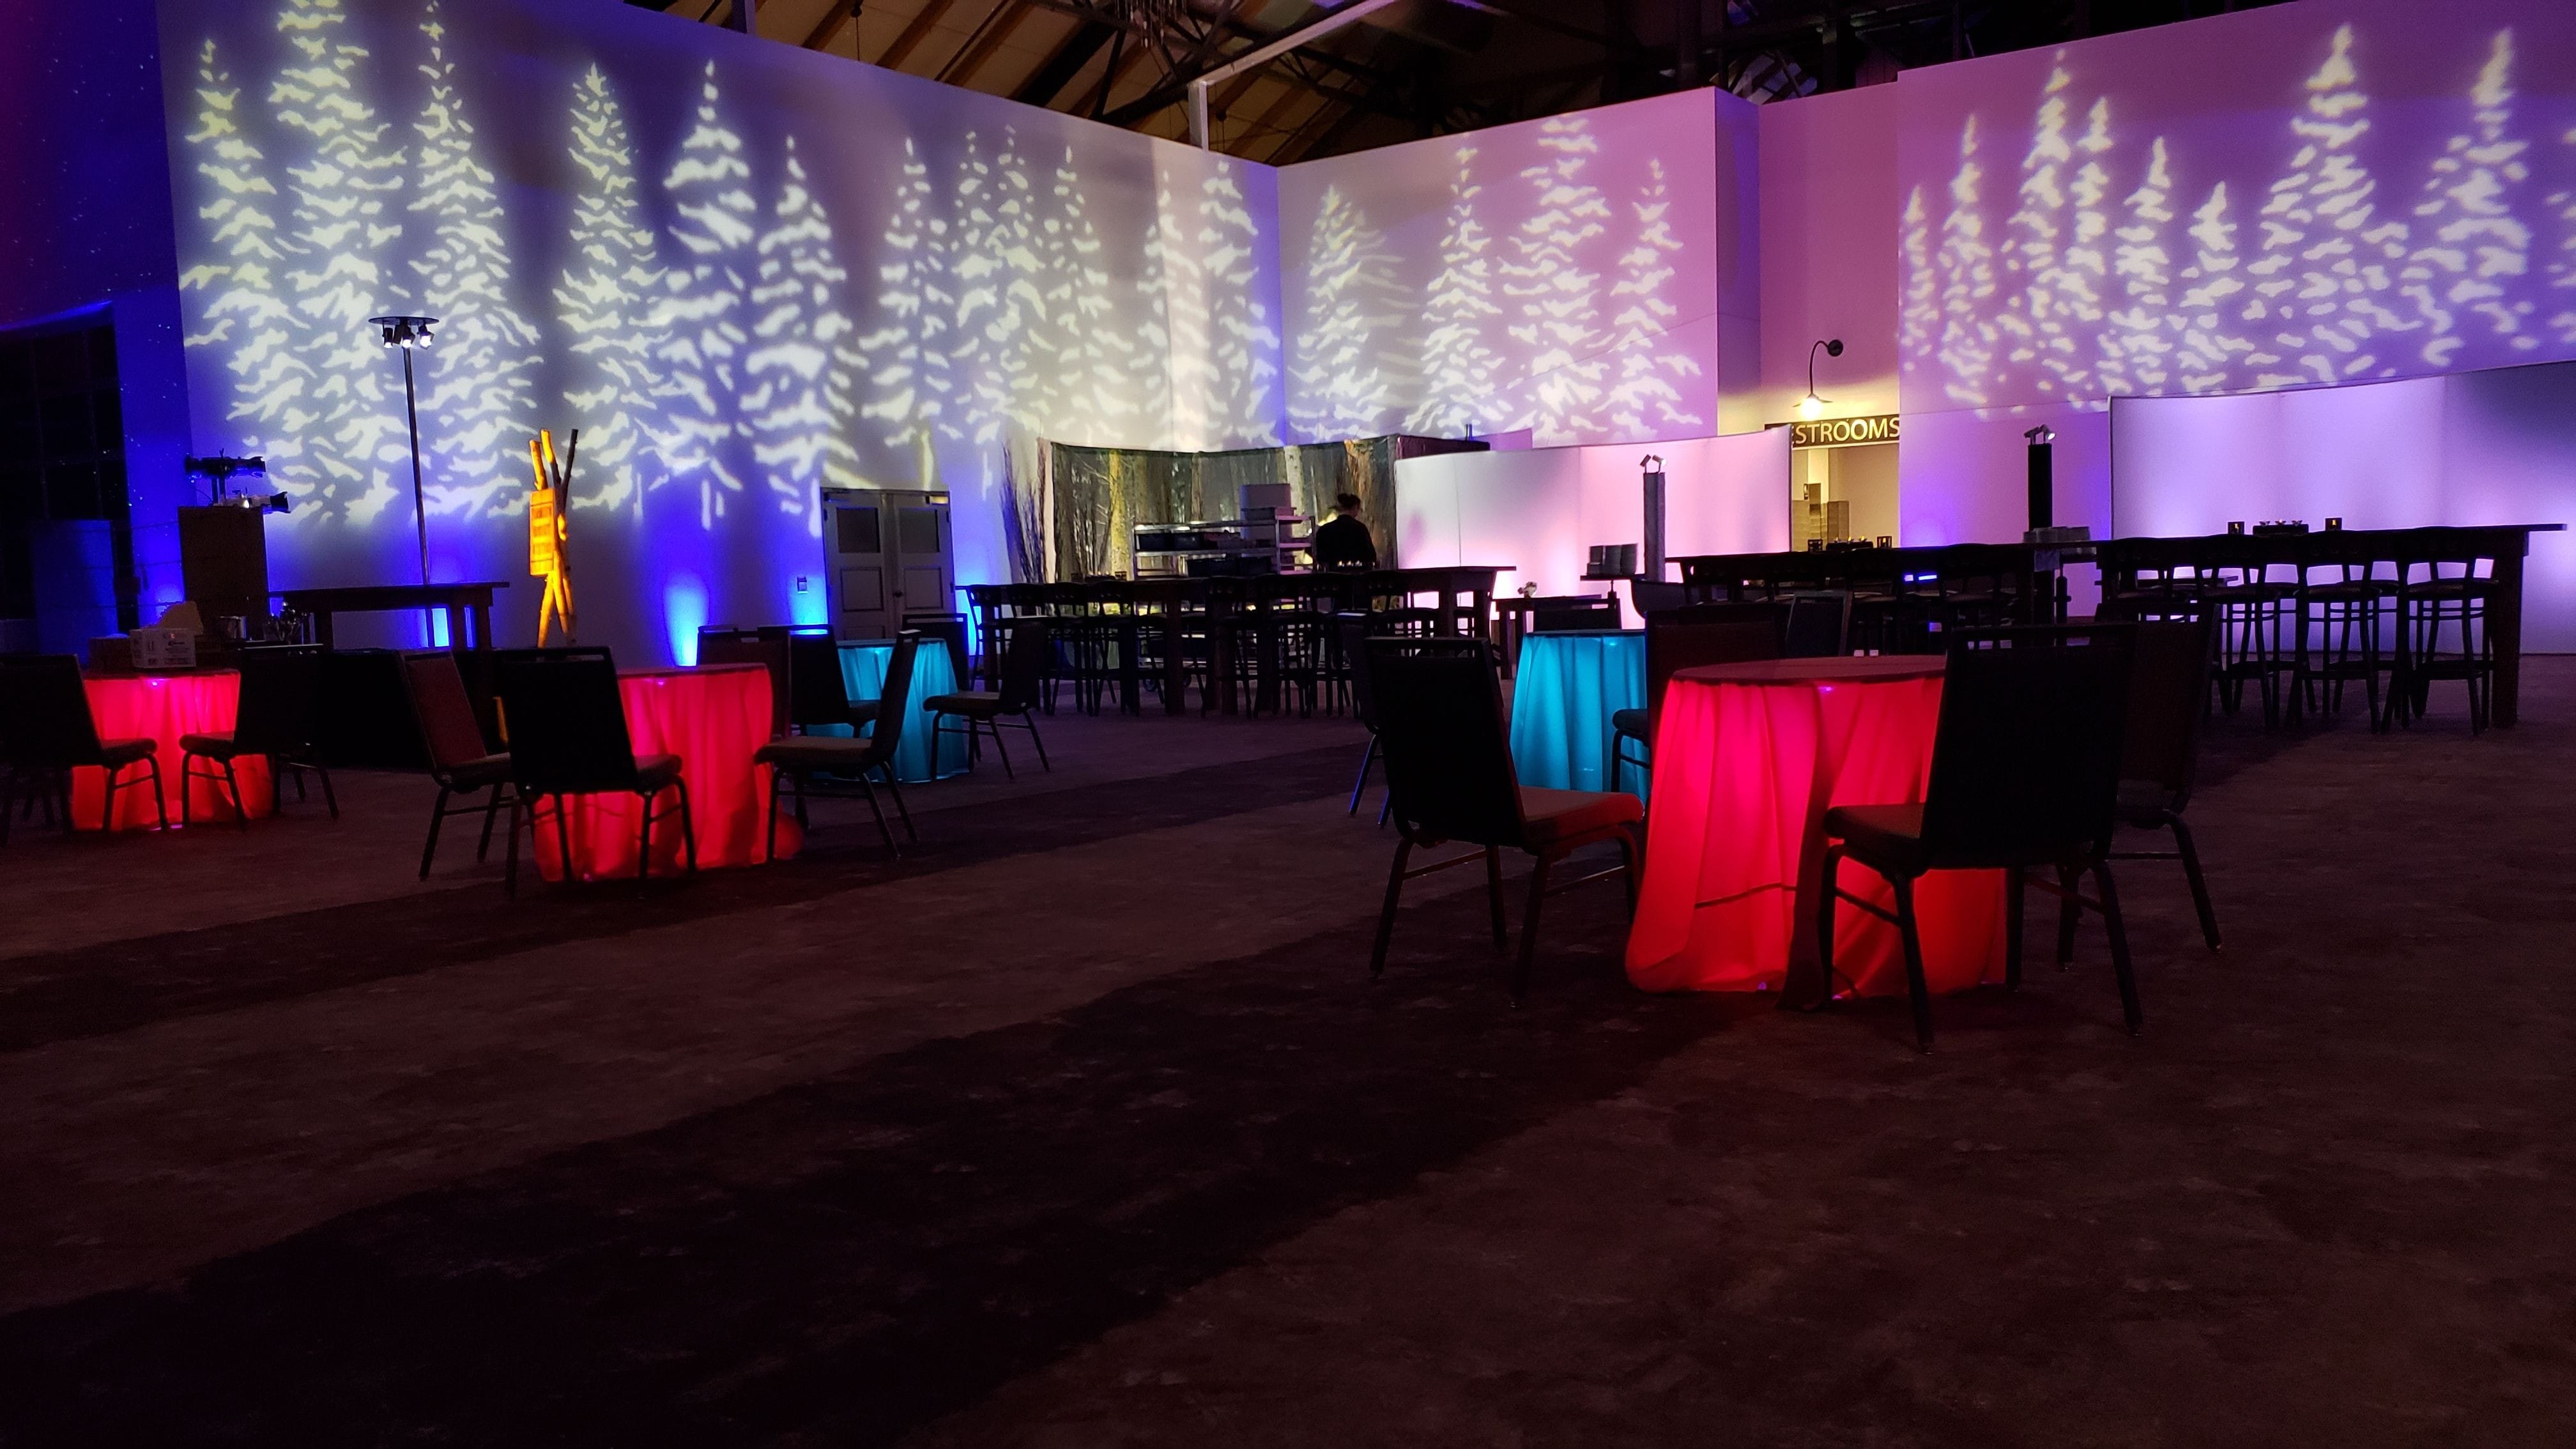 Winter holiday event lighting at the Minneapolis Renaissance - The Depot